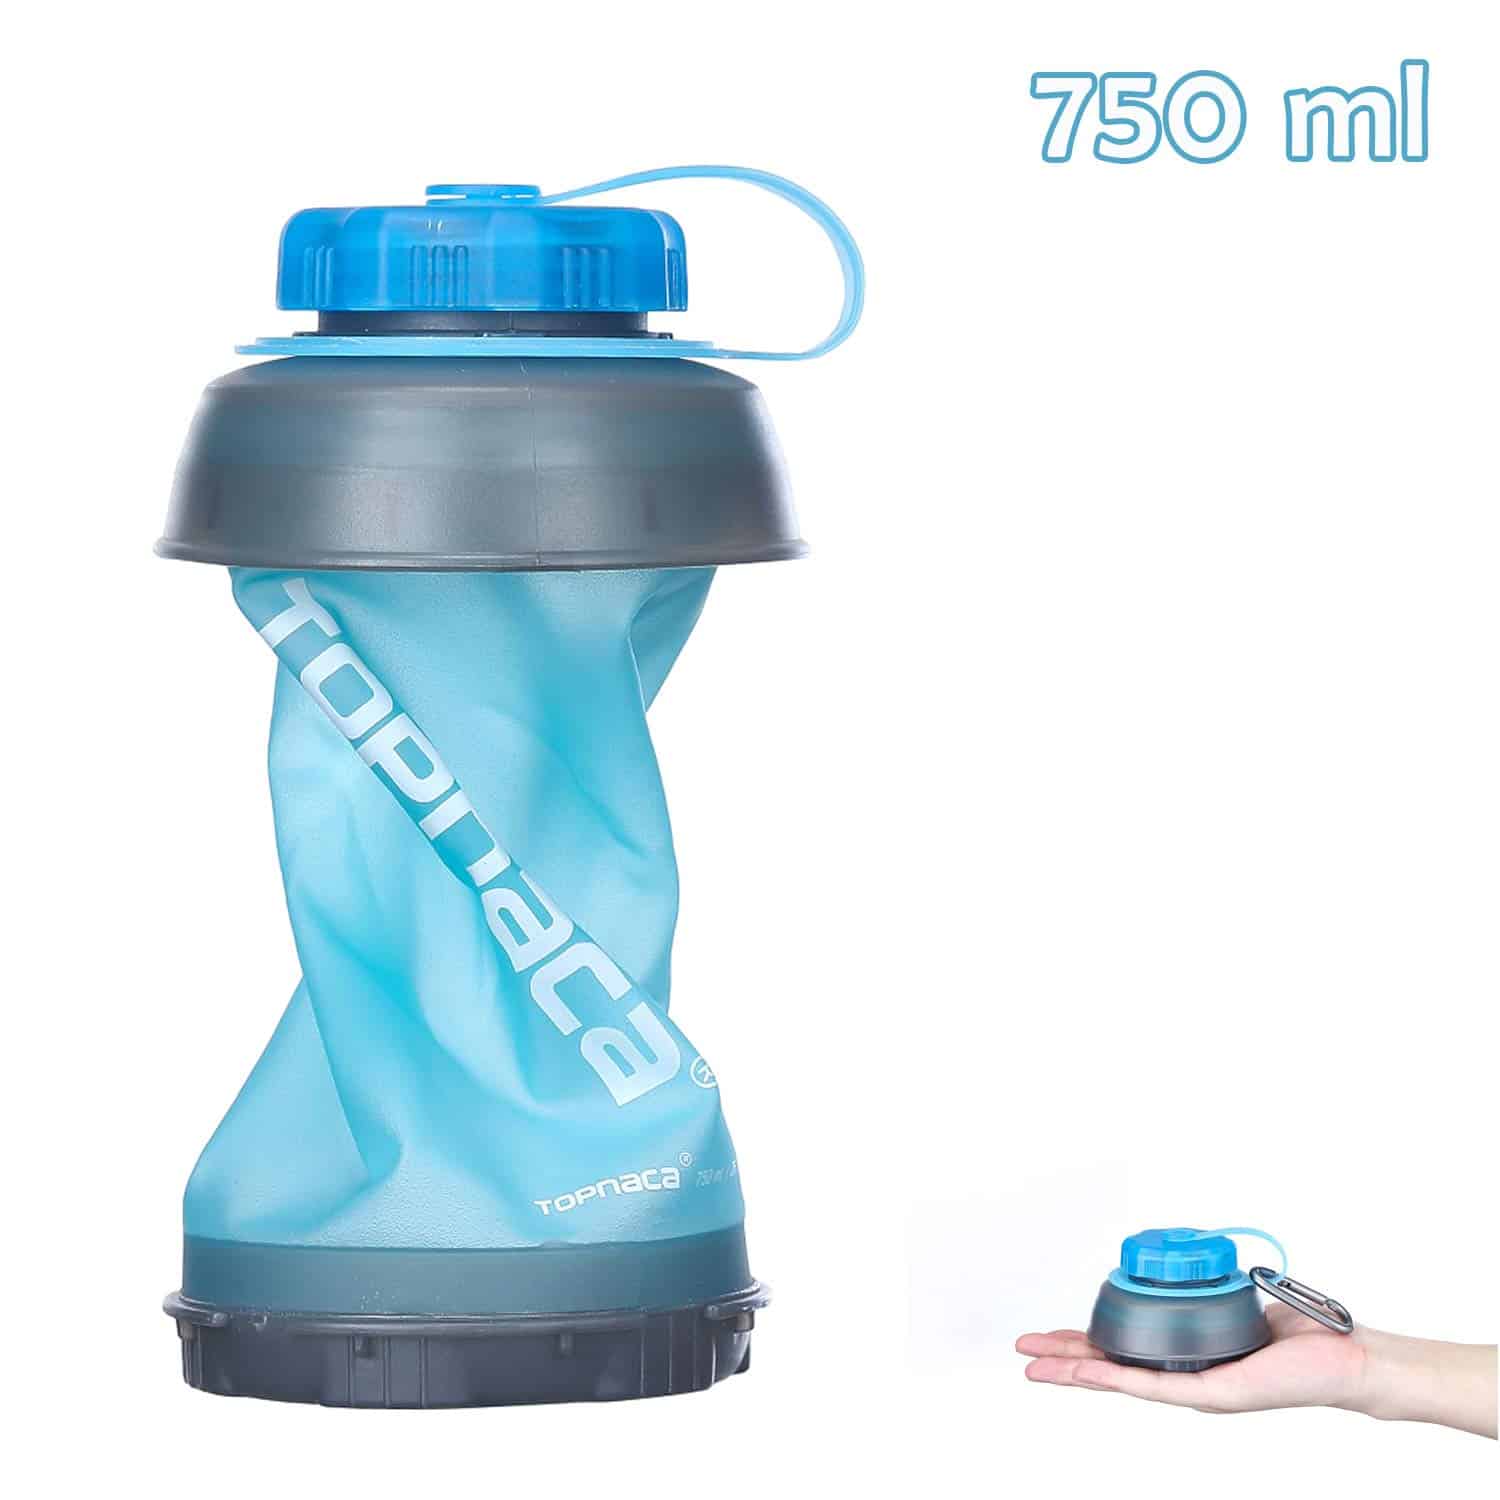 RSTime 800ML Collapsible Water Bottle,BPA Free Silicone Foldable Sports Water Bottles for Travel Gym Camping Hiking,Reuseable Portable Leak Proof Sports Drinking Water Bottle 